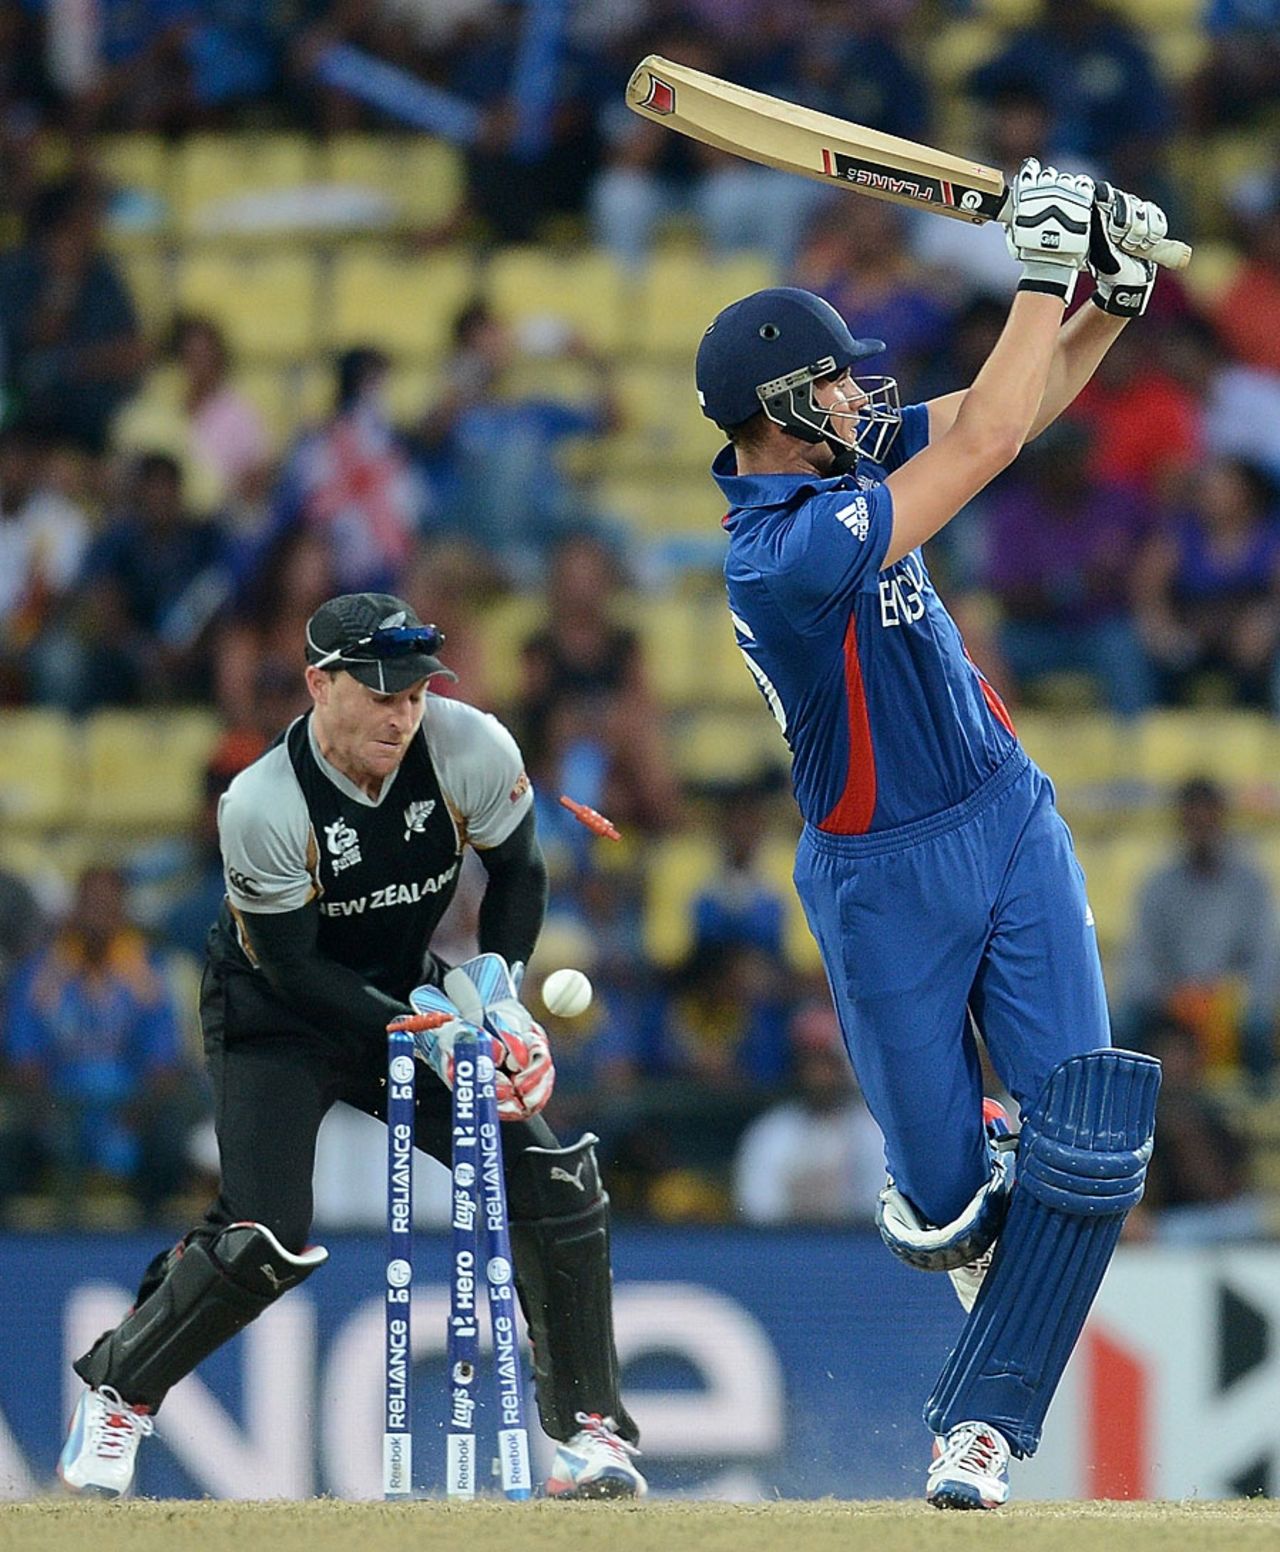 Alex Hales is bowled after giving Nathan McCullum the charge, England v New Zealand, World Twenty20, Super Eights, Pallekele, September 29, 2012